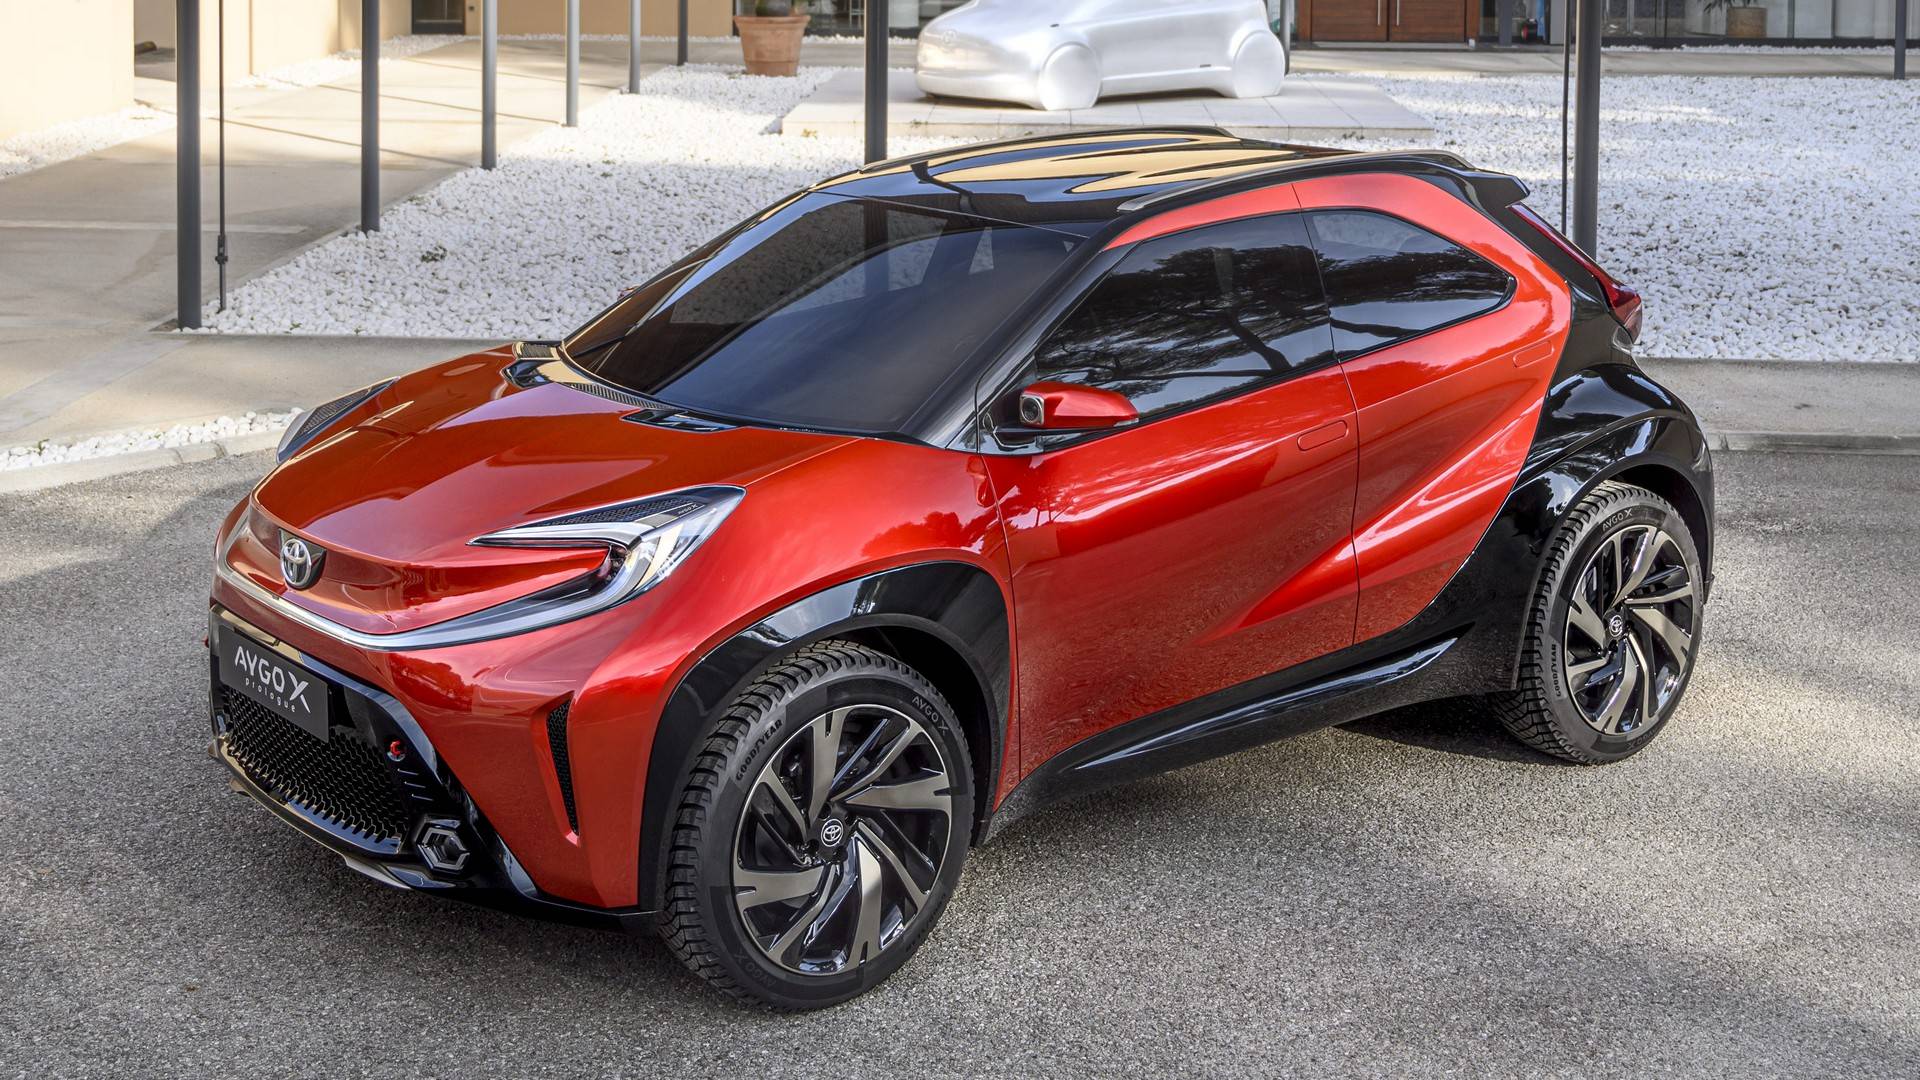 New toyota aygo x prologue concept previews small rugged crossover for 2022 | carscoops